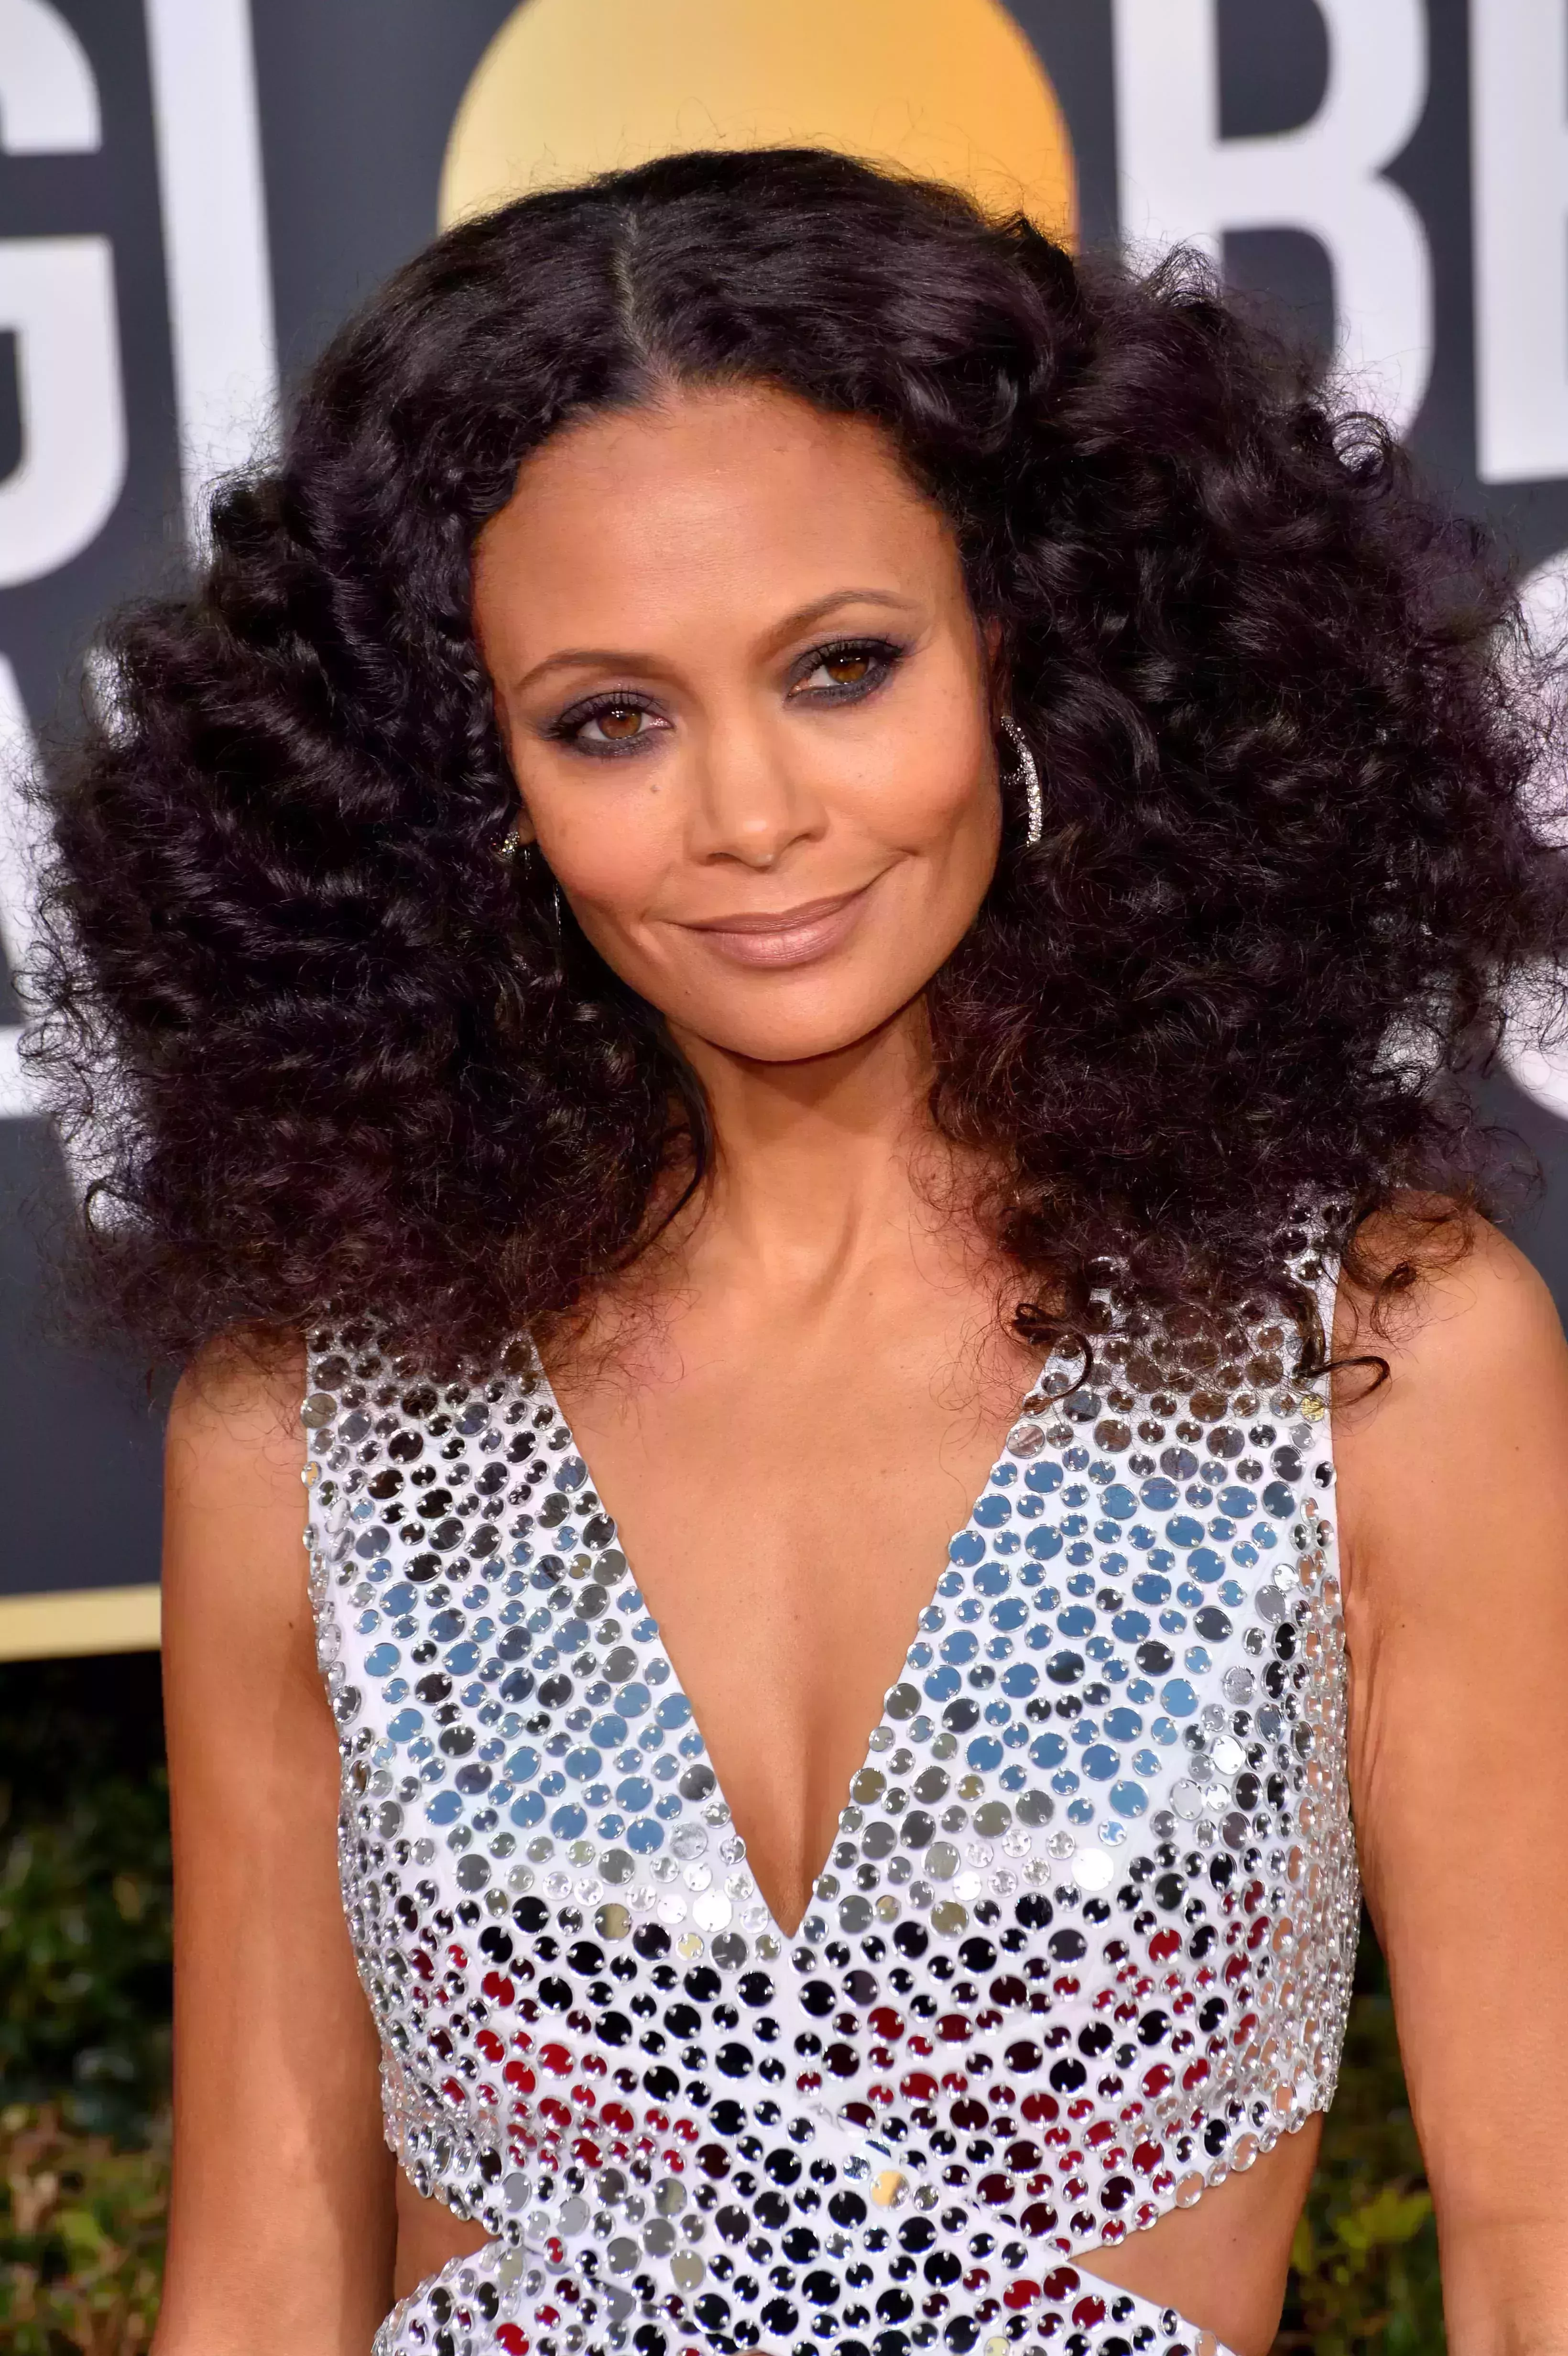 Thandie Newton’s Middle-Parted Afro